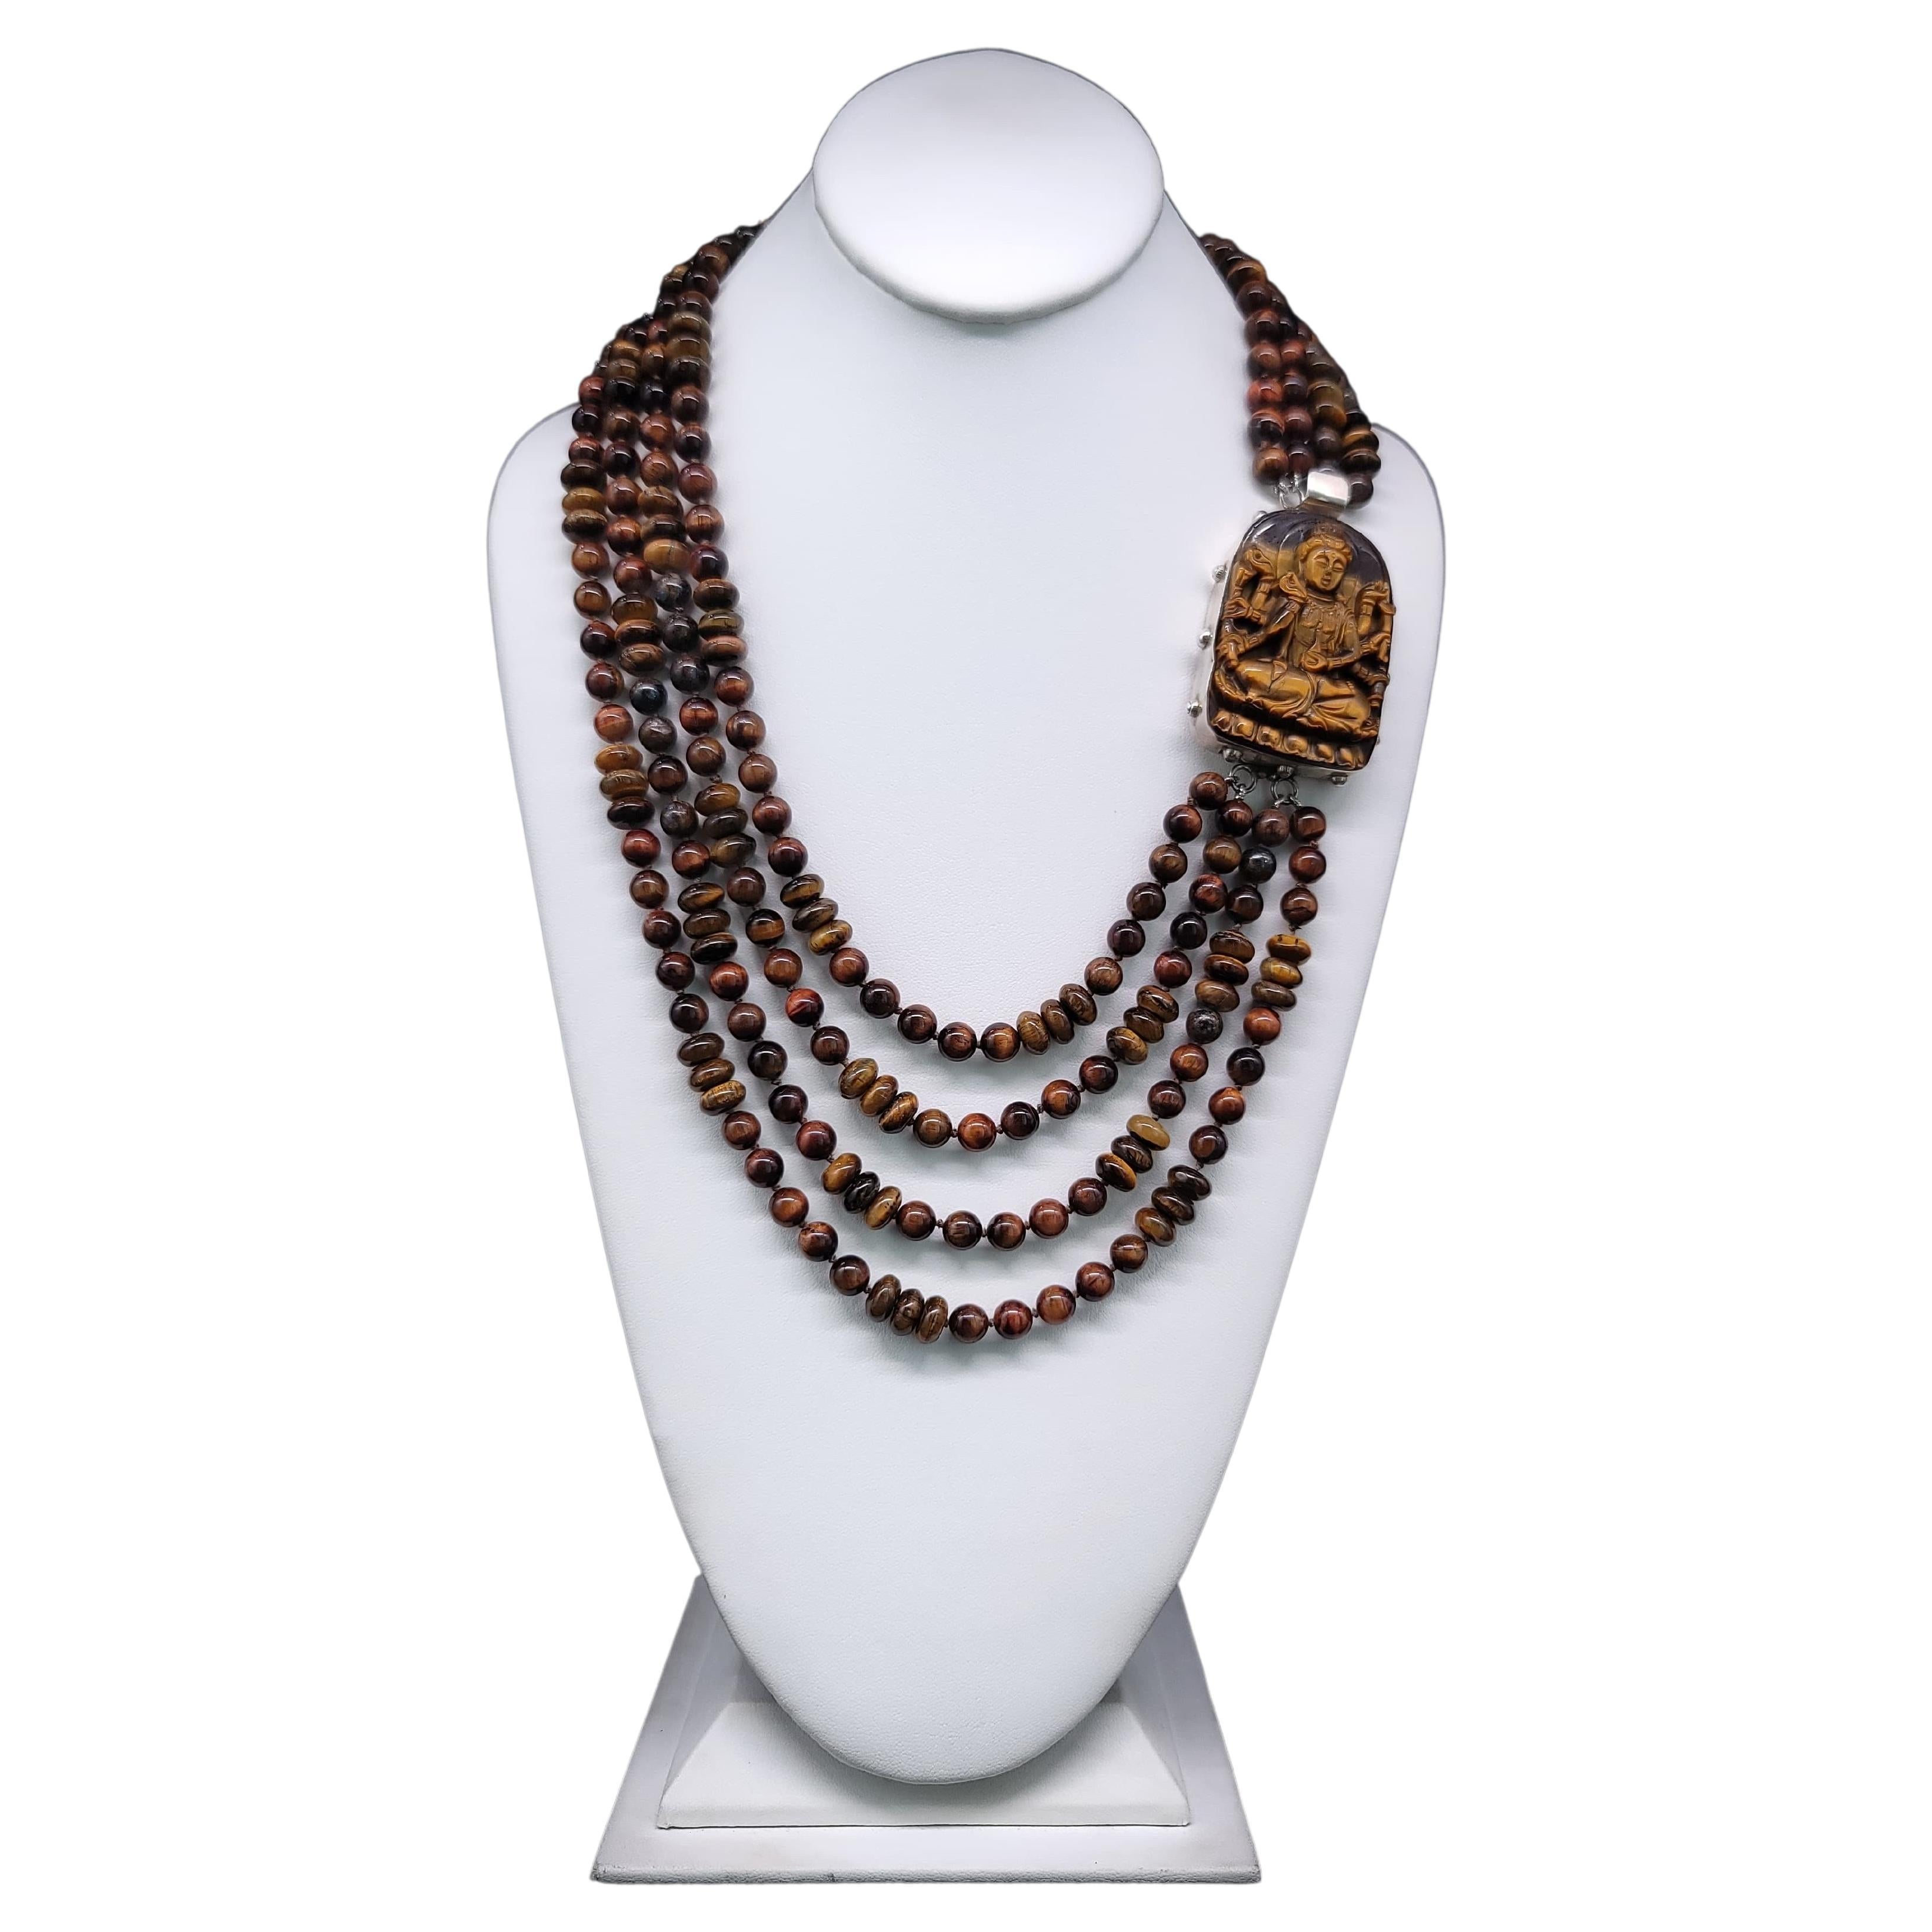 A.jeschel Sophisticated Tiger’s Eye Necklace with a Powerful Clasp.